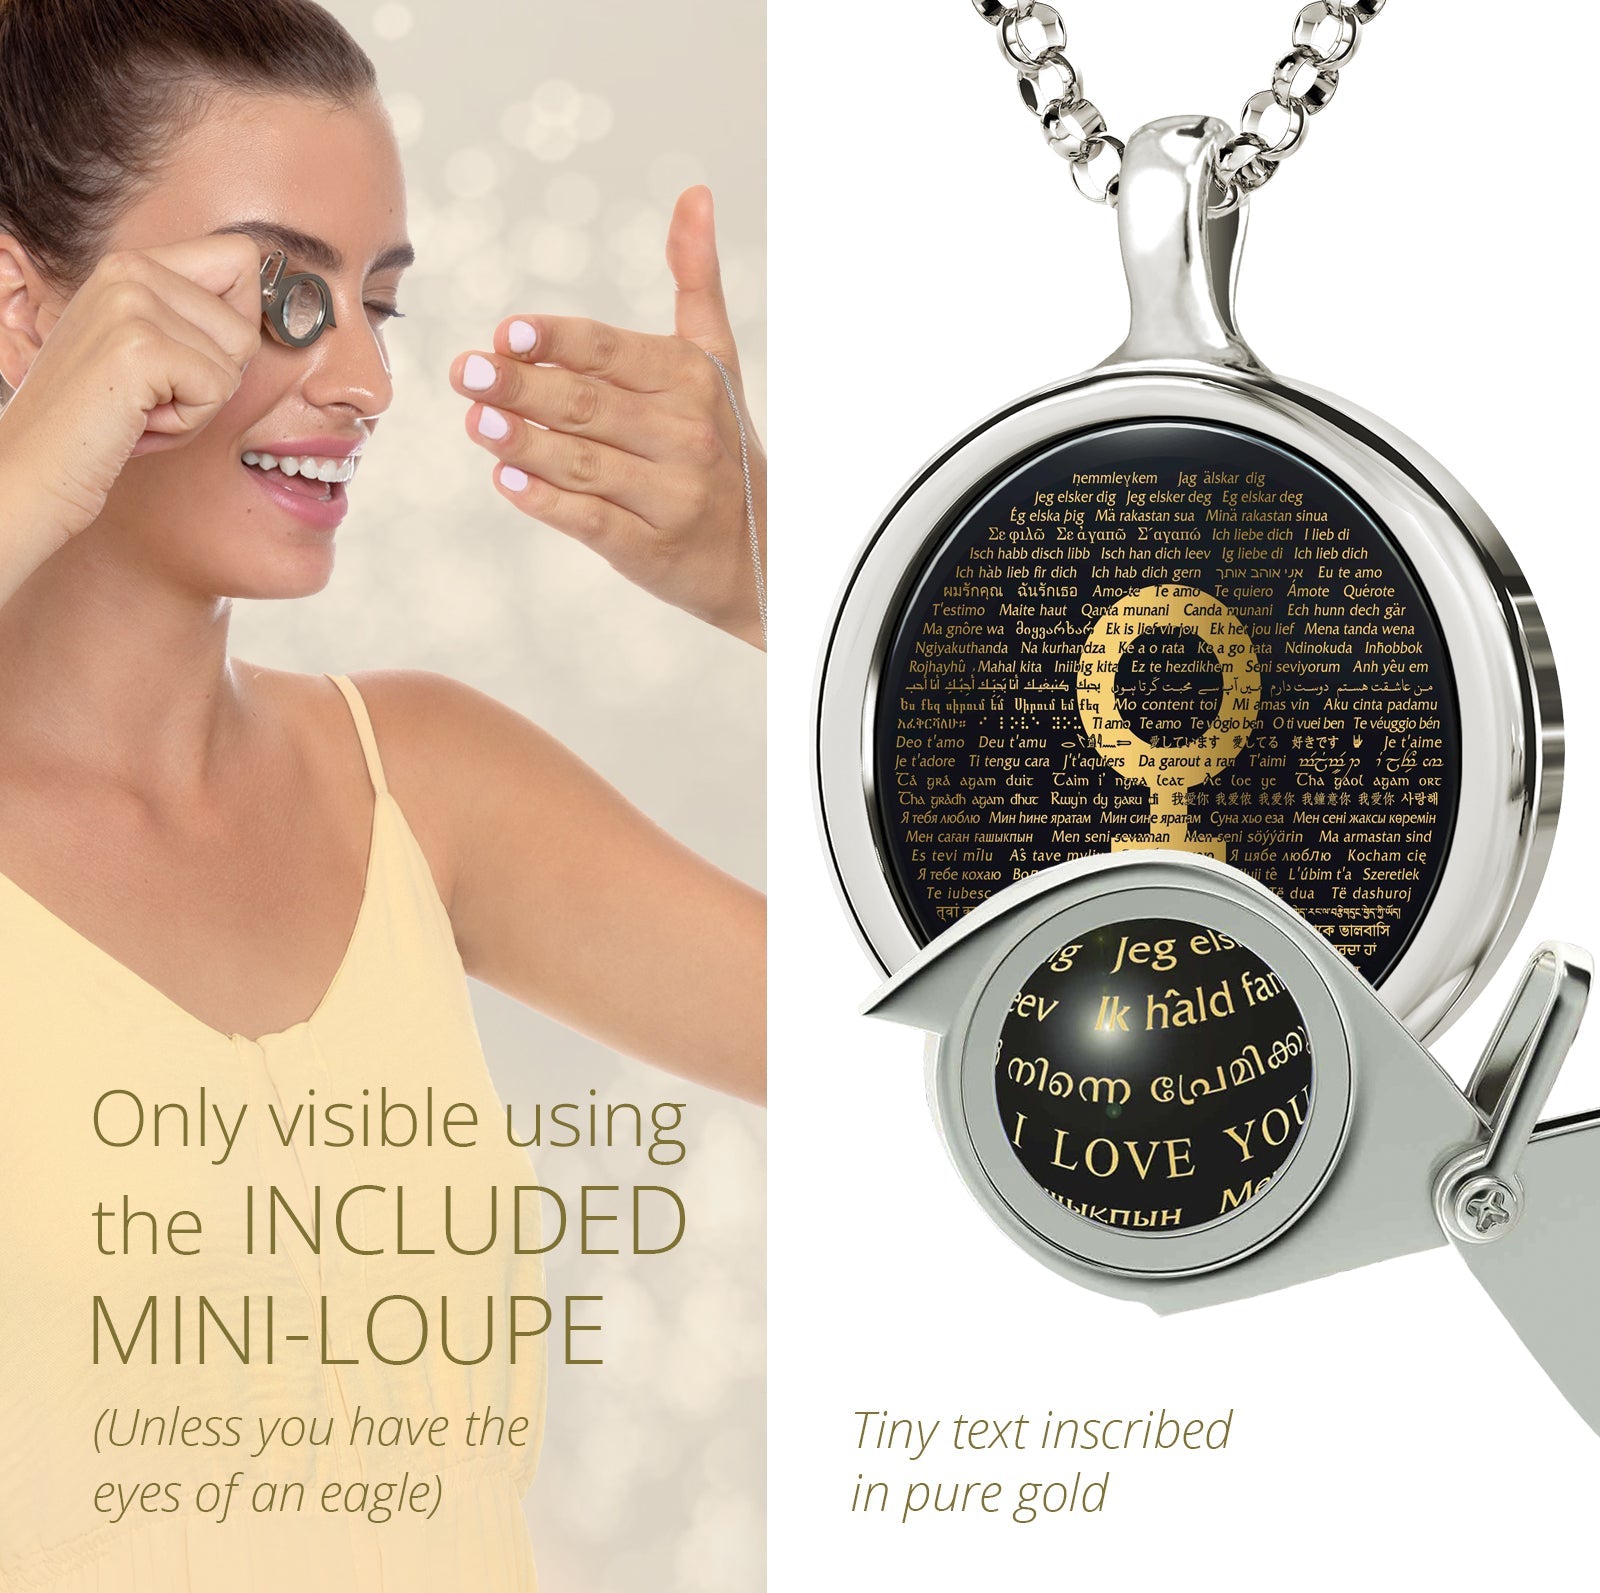 Circular "Loving Women Are from Venus Necklace 120 Languages I Love You Pendant" with engraved text centered and names in various languages, symbolizing global unity and peace, as well as a unique gift idea.